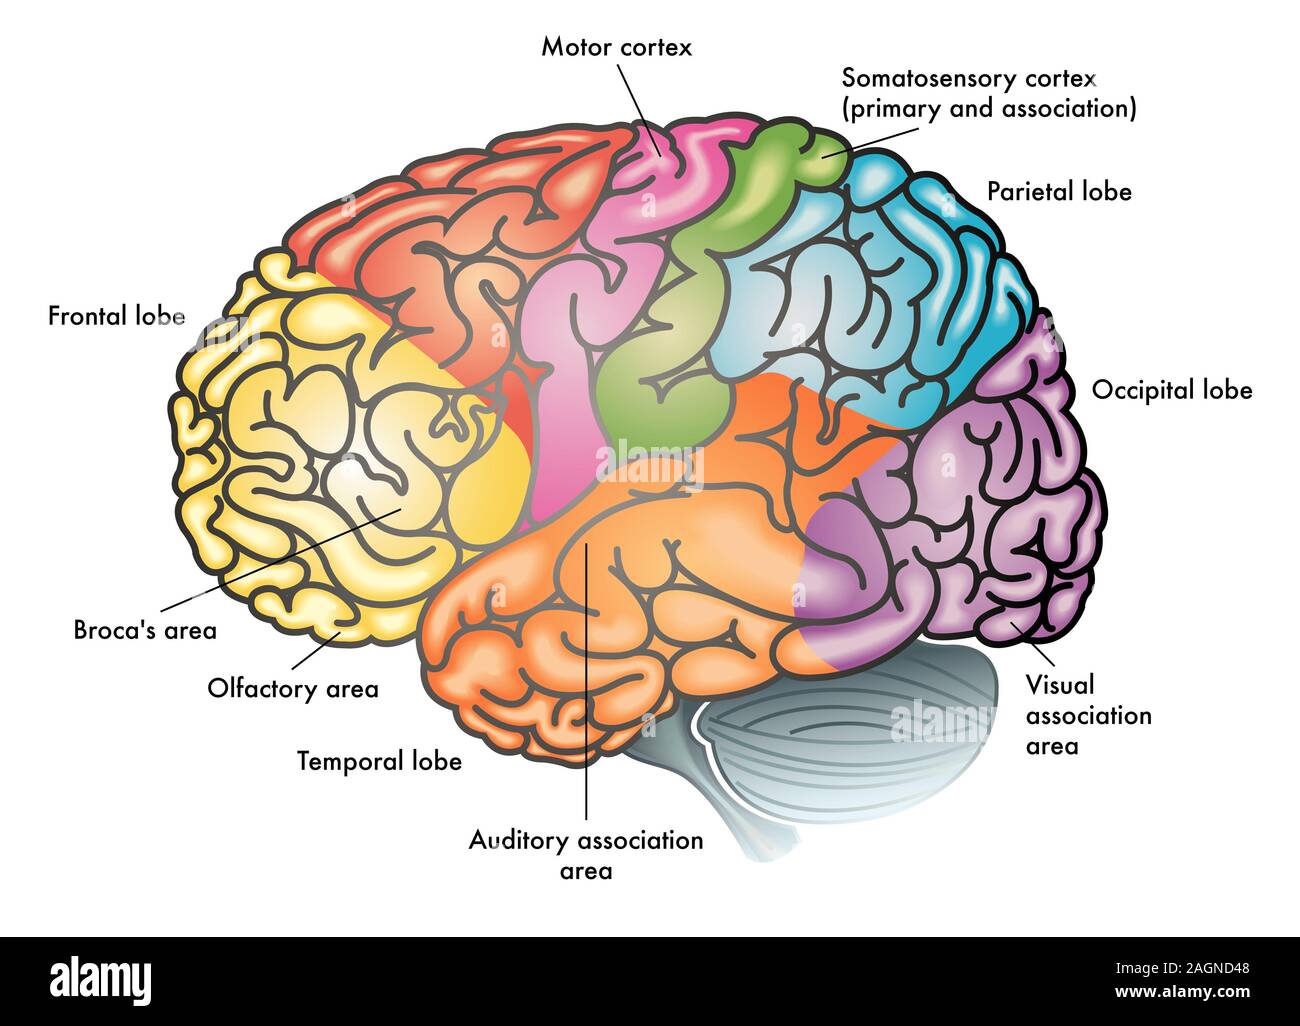 medical colorful illustration of a human brain with different functional areas highlighted with different colors Stock Photo